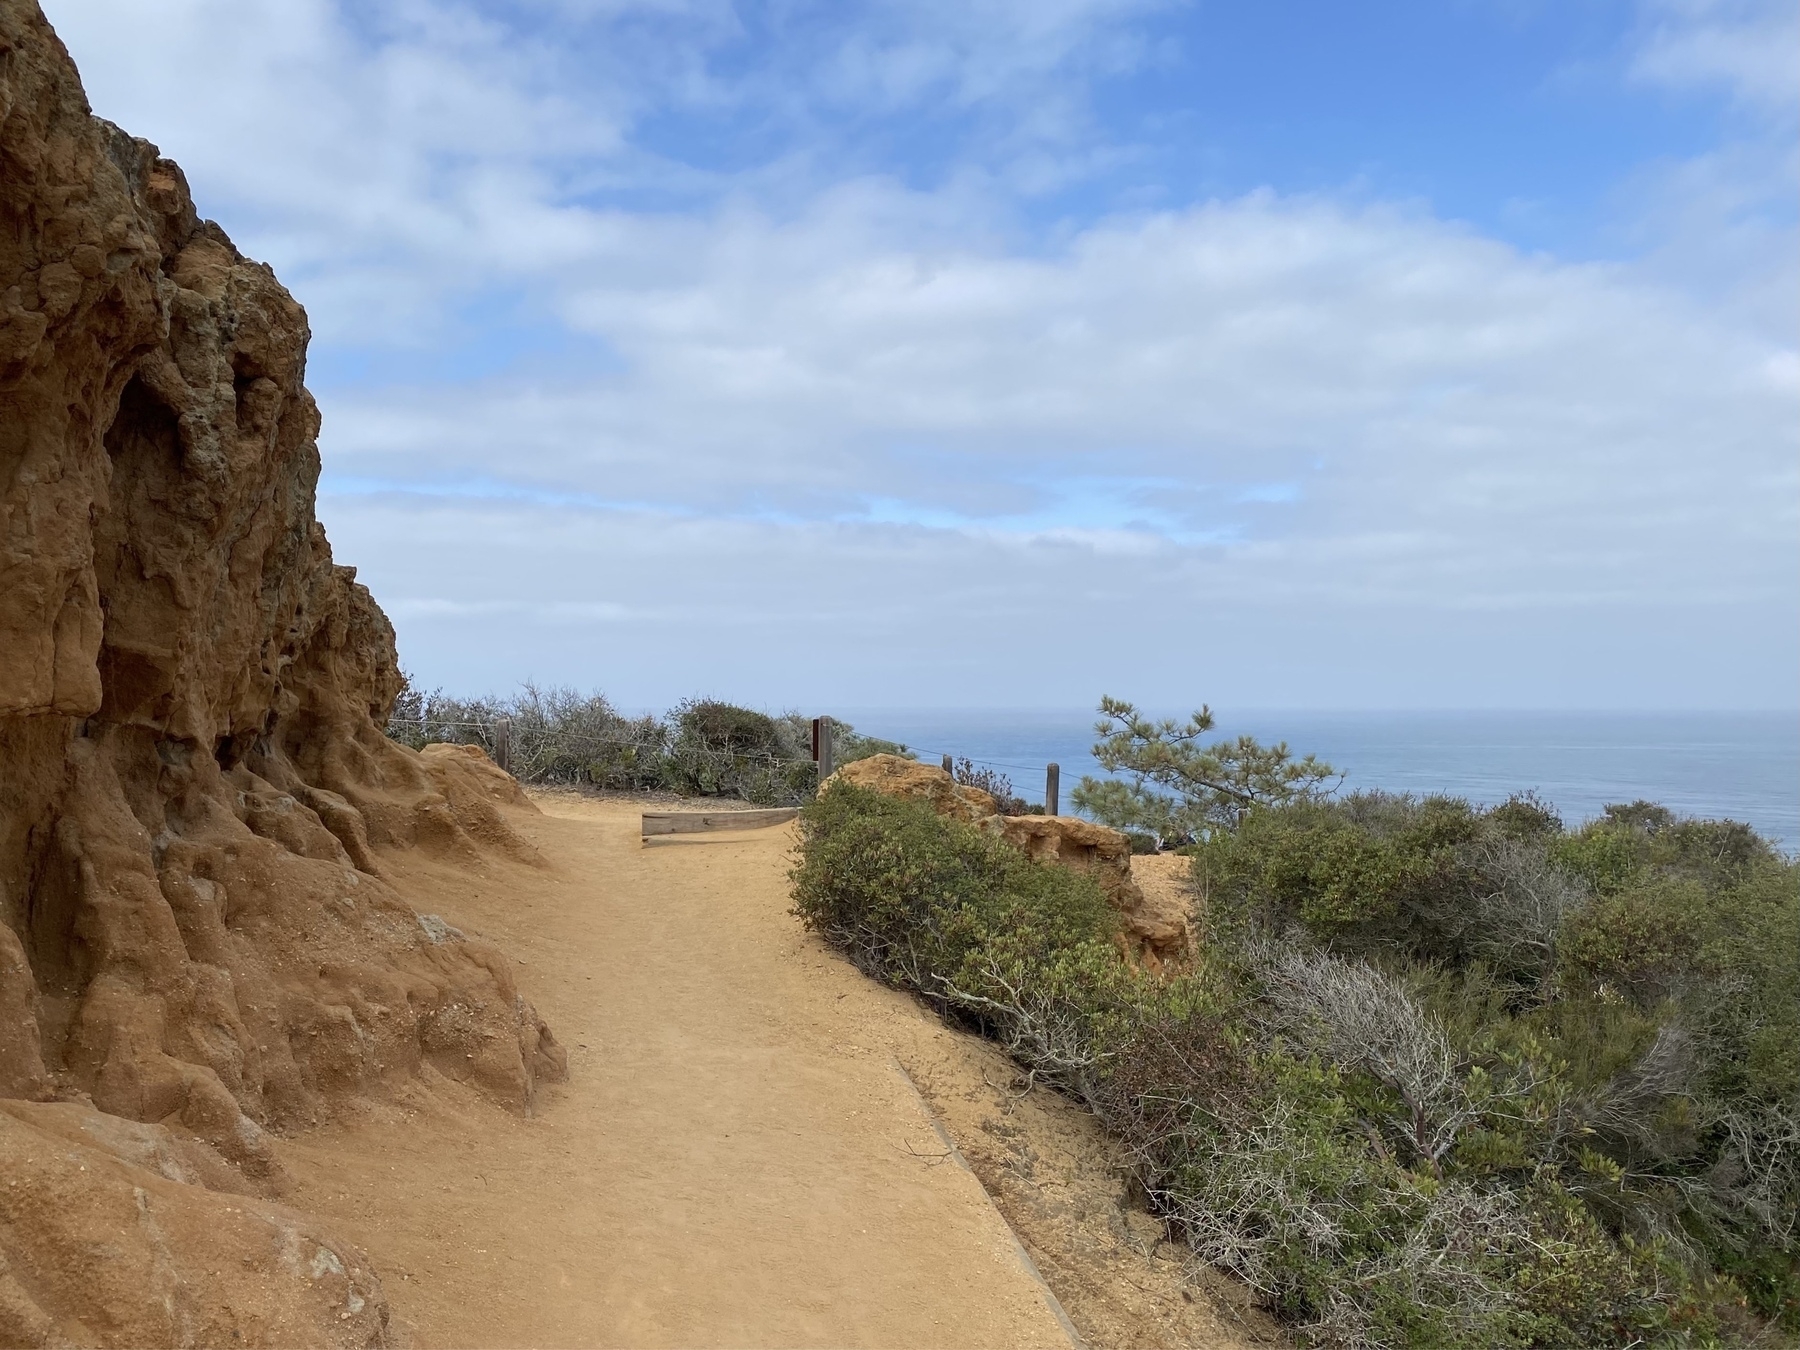 View of a dirt path leading pas an eroded cliff with the ocean in the background.